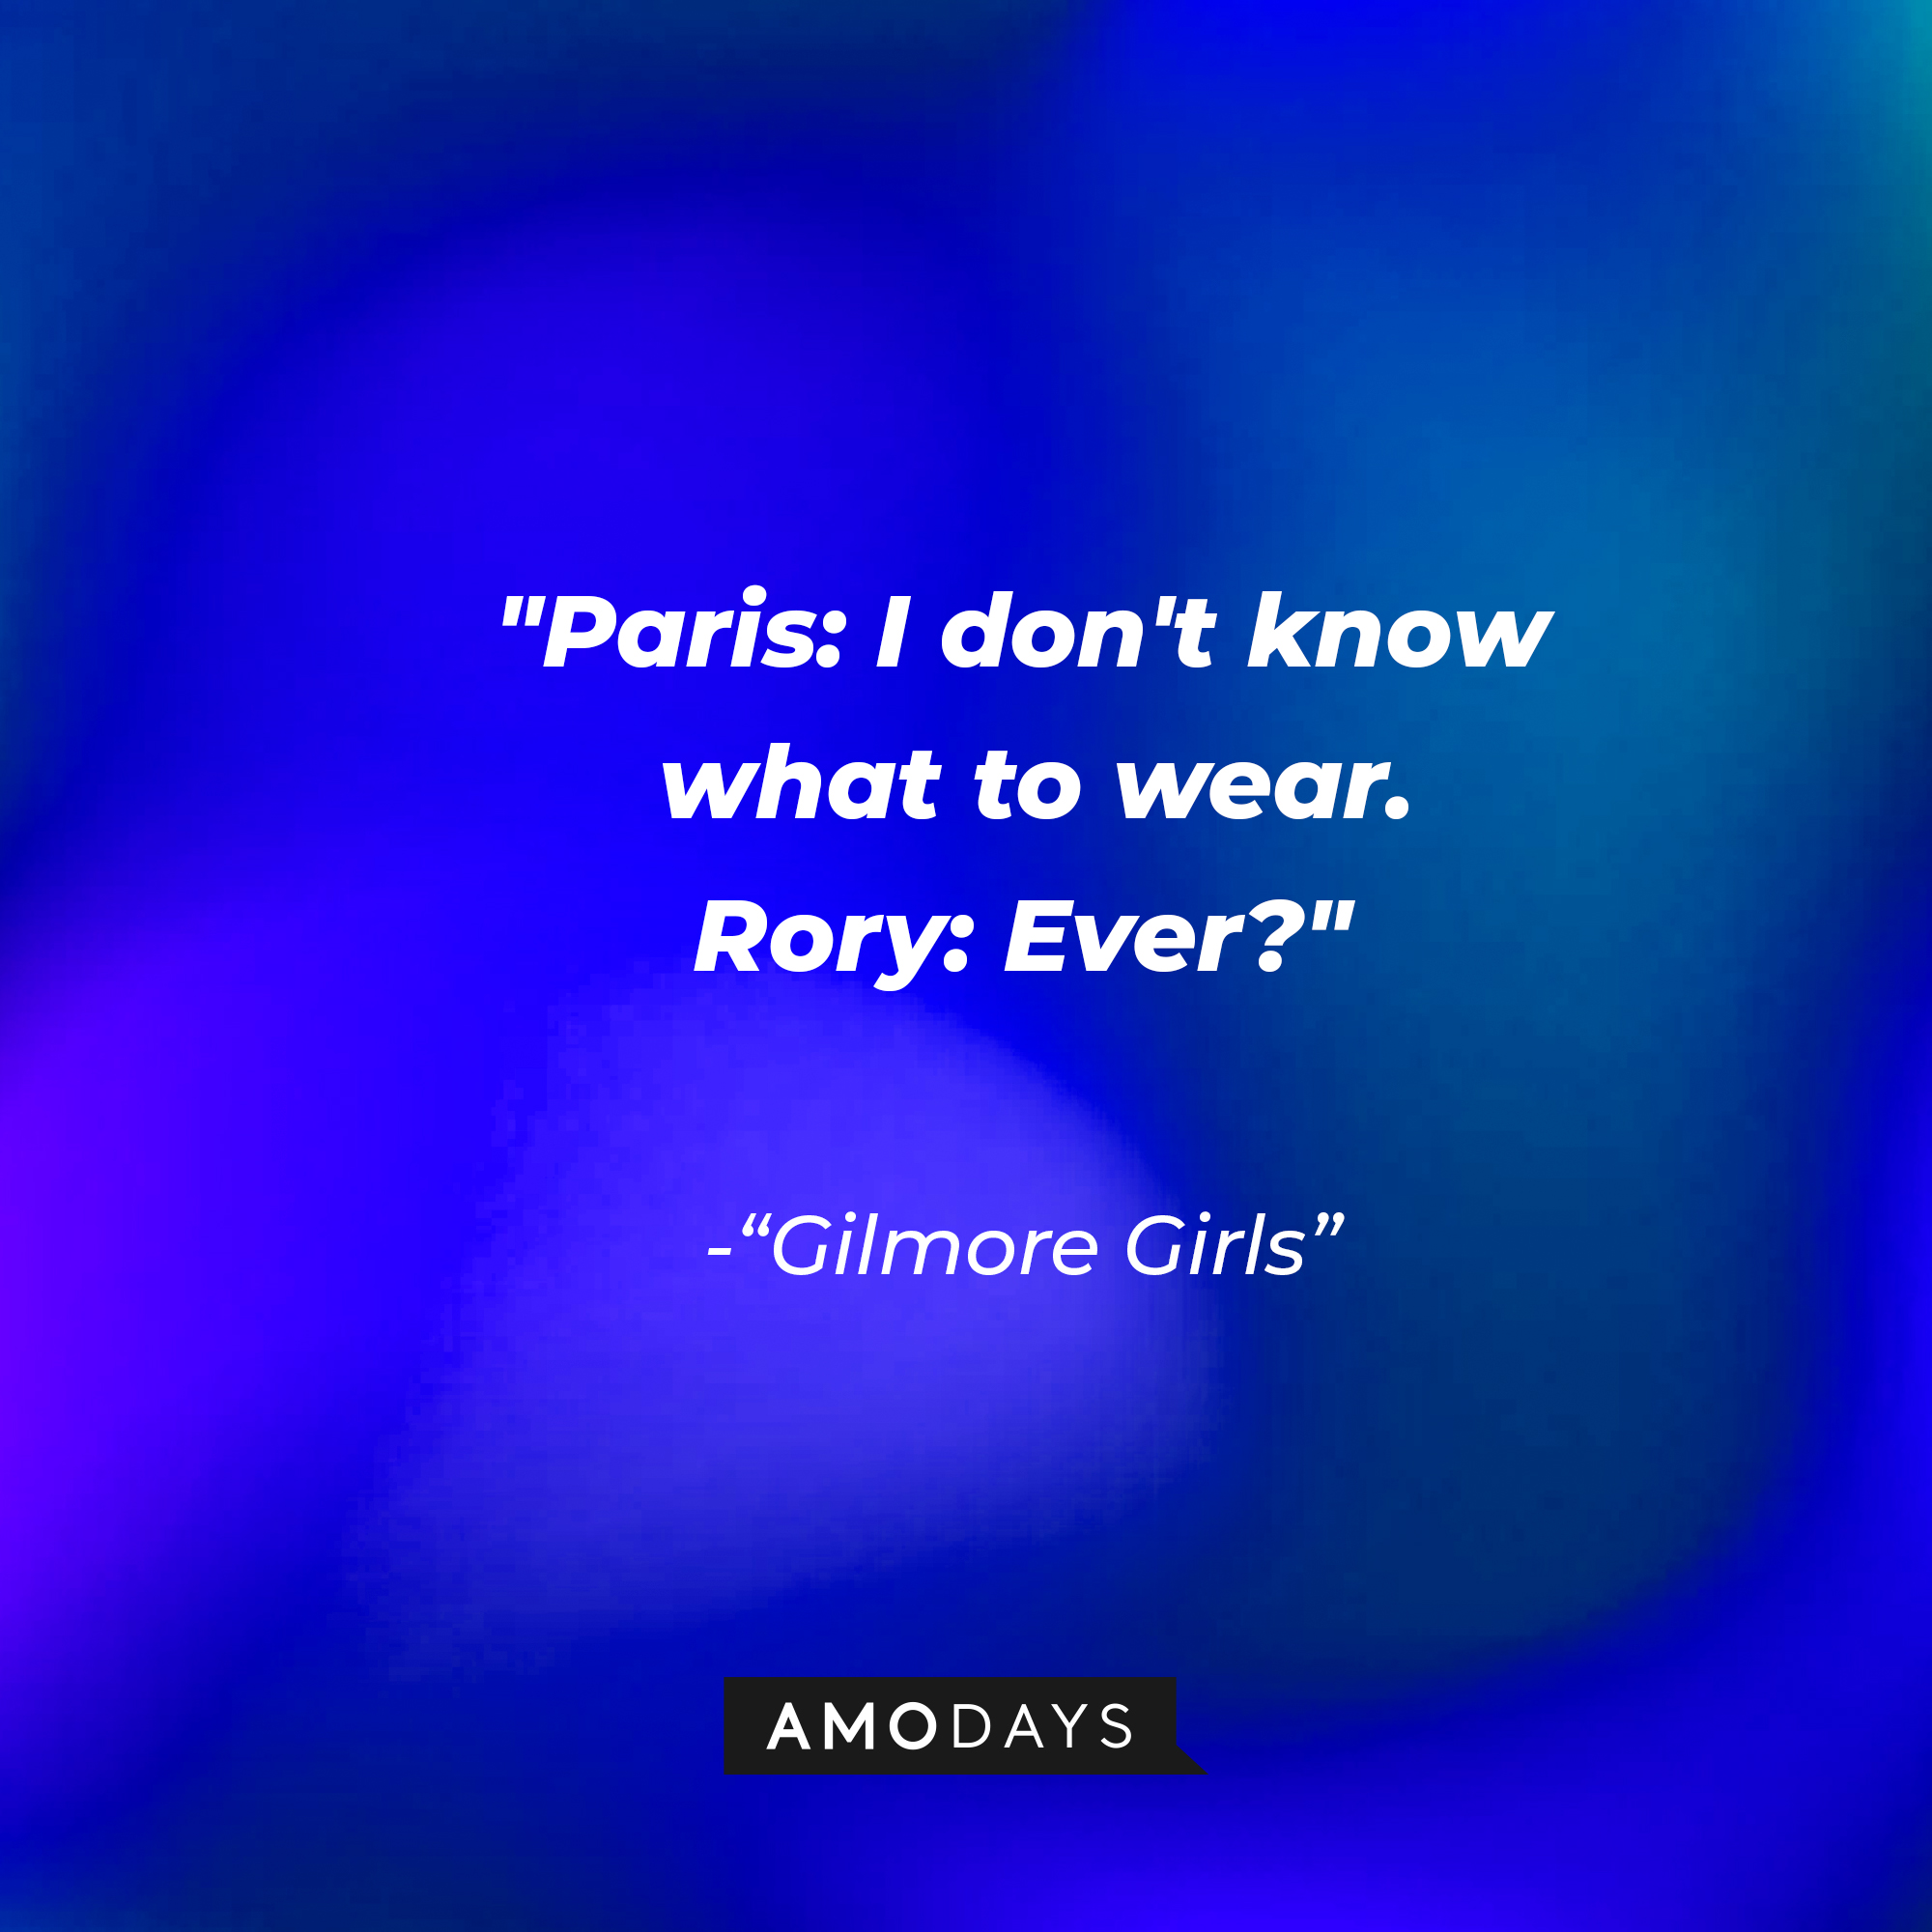 Quote from "Gilmore Girls": "Paris: I don't know what to wear. Rory: Ever?" | Source: AmoDays